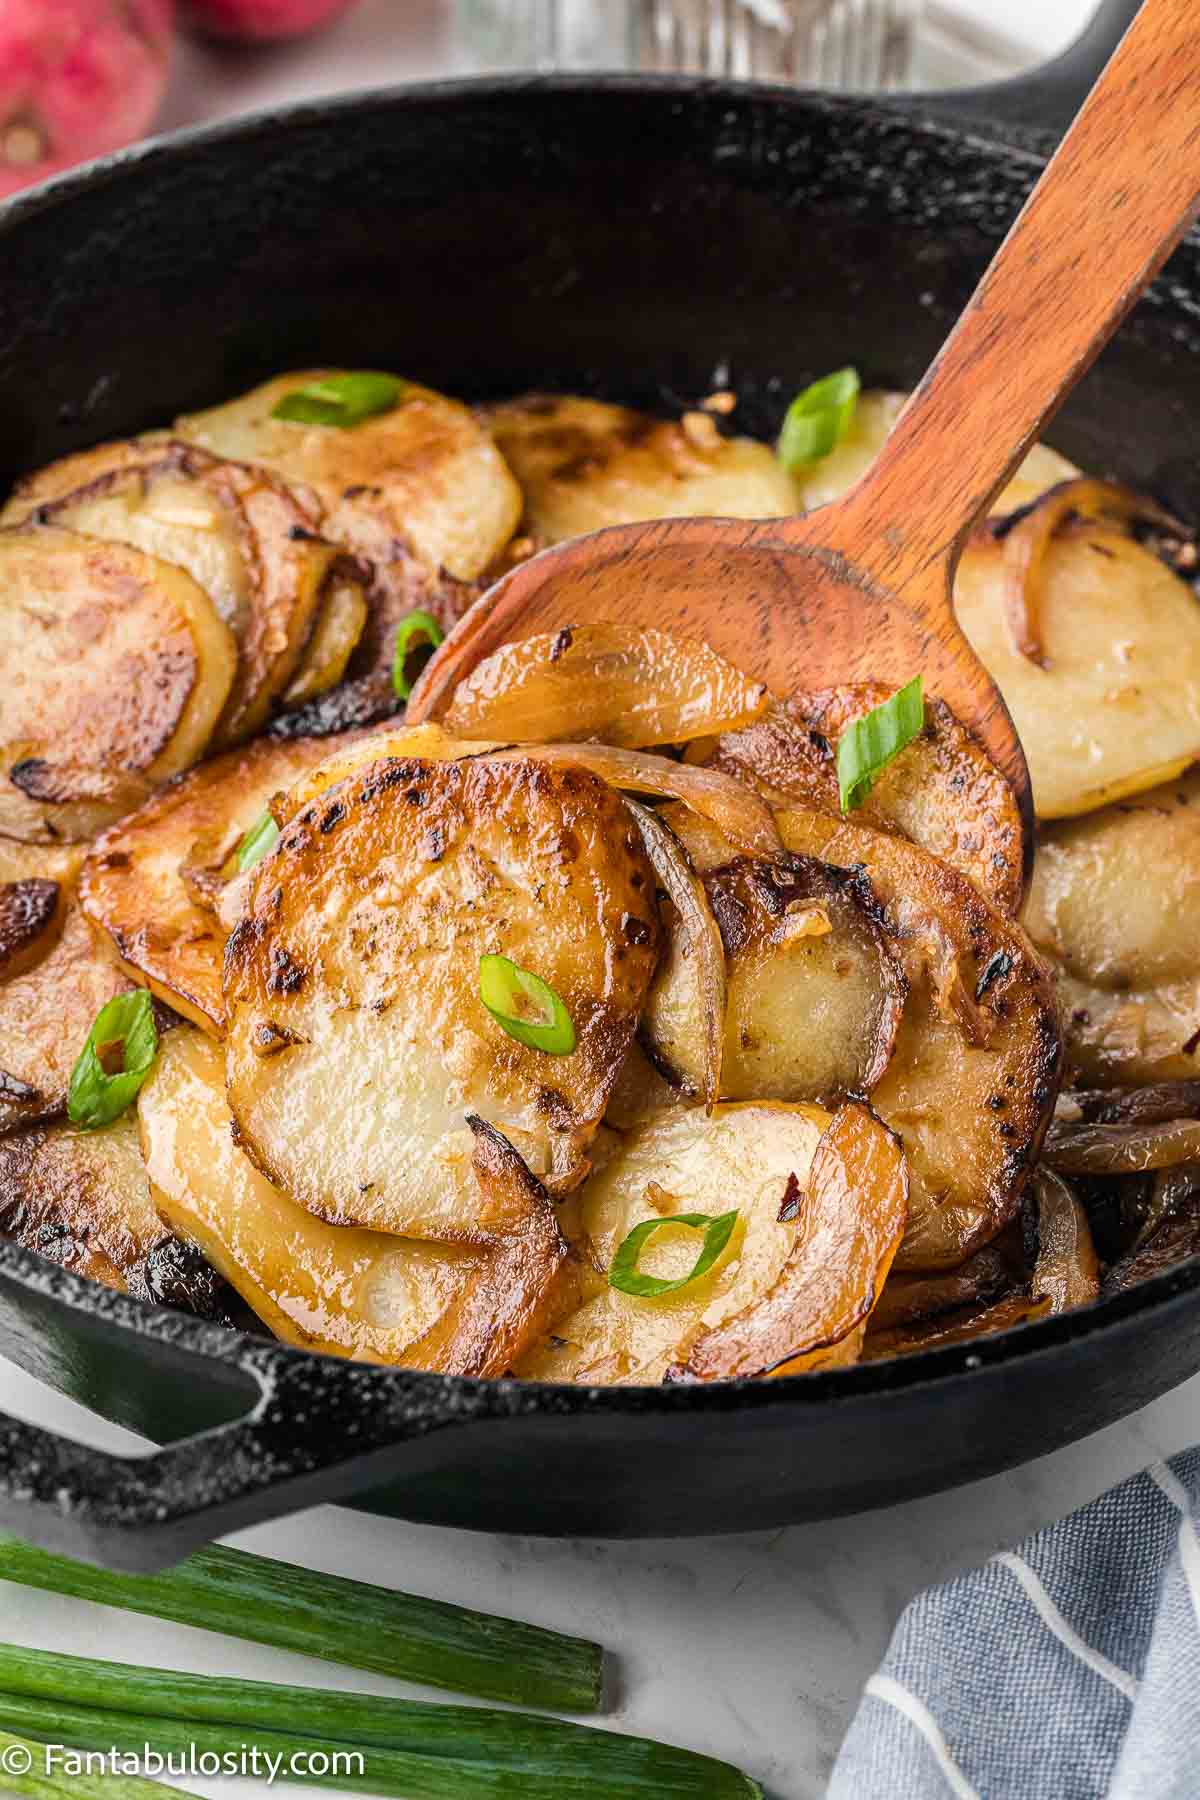 Cooked fried potatoes and onions in cast iron skillet.